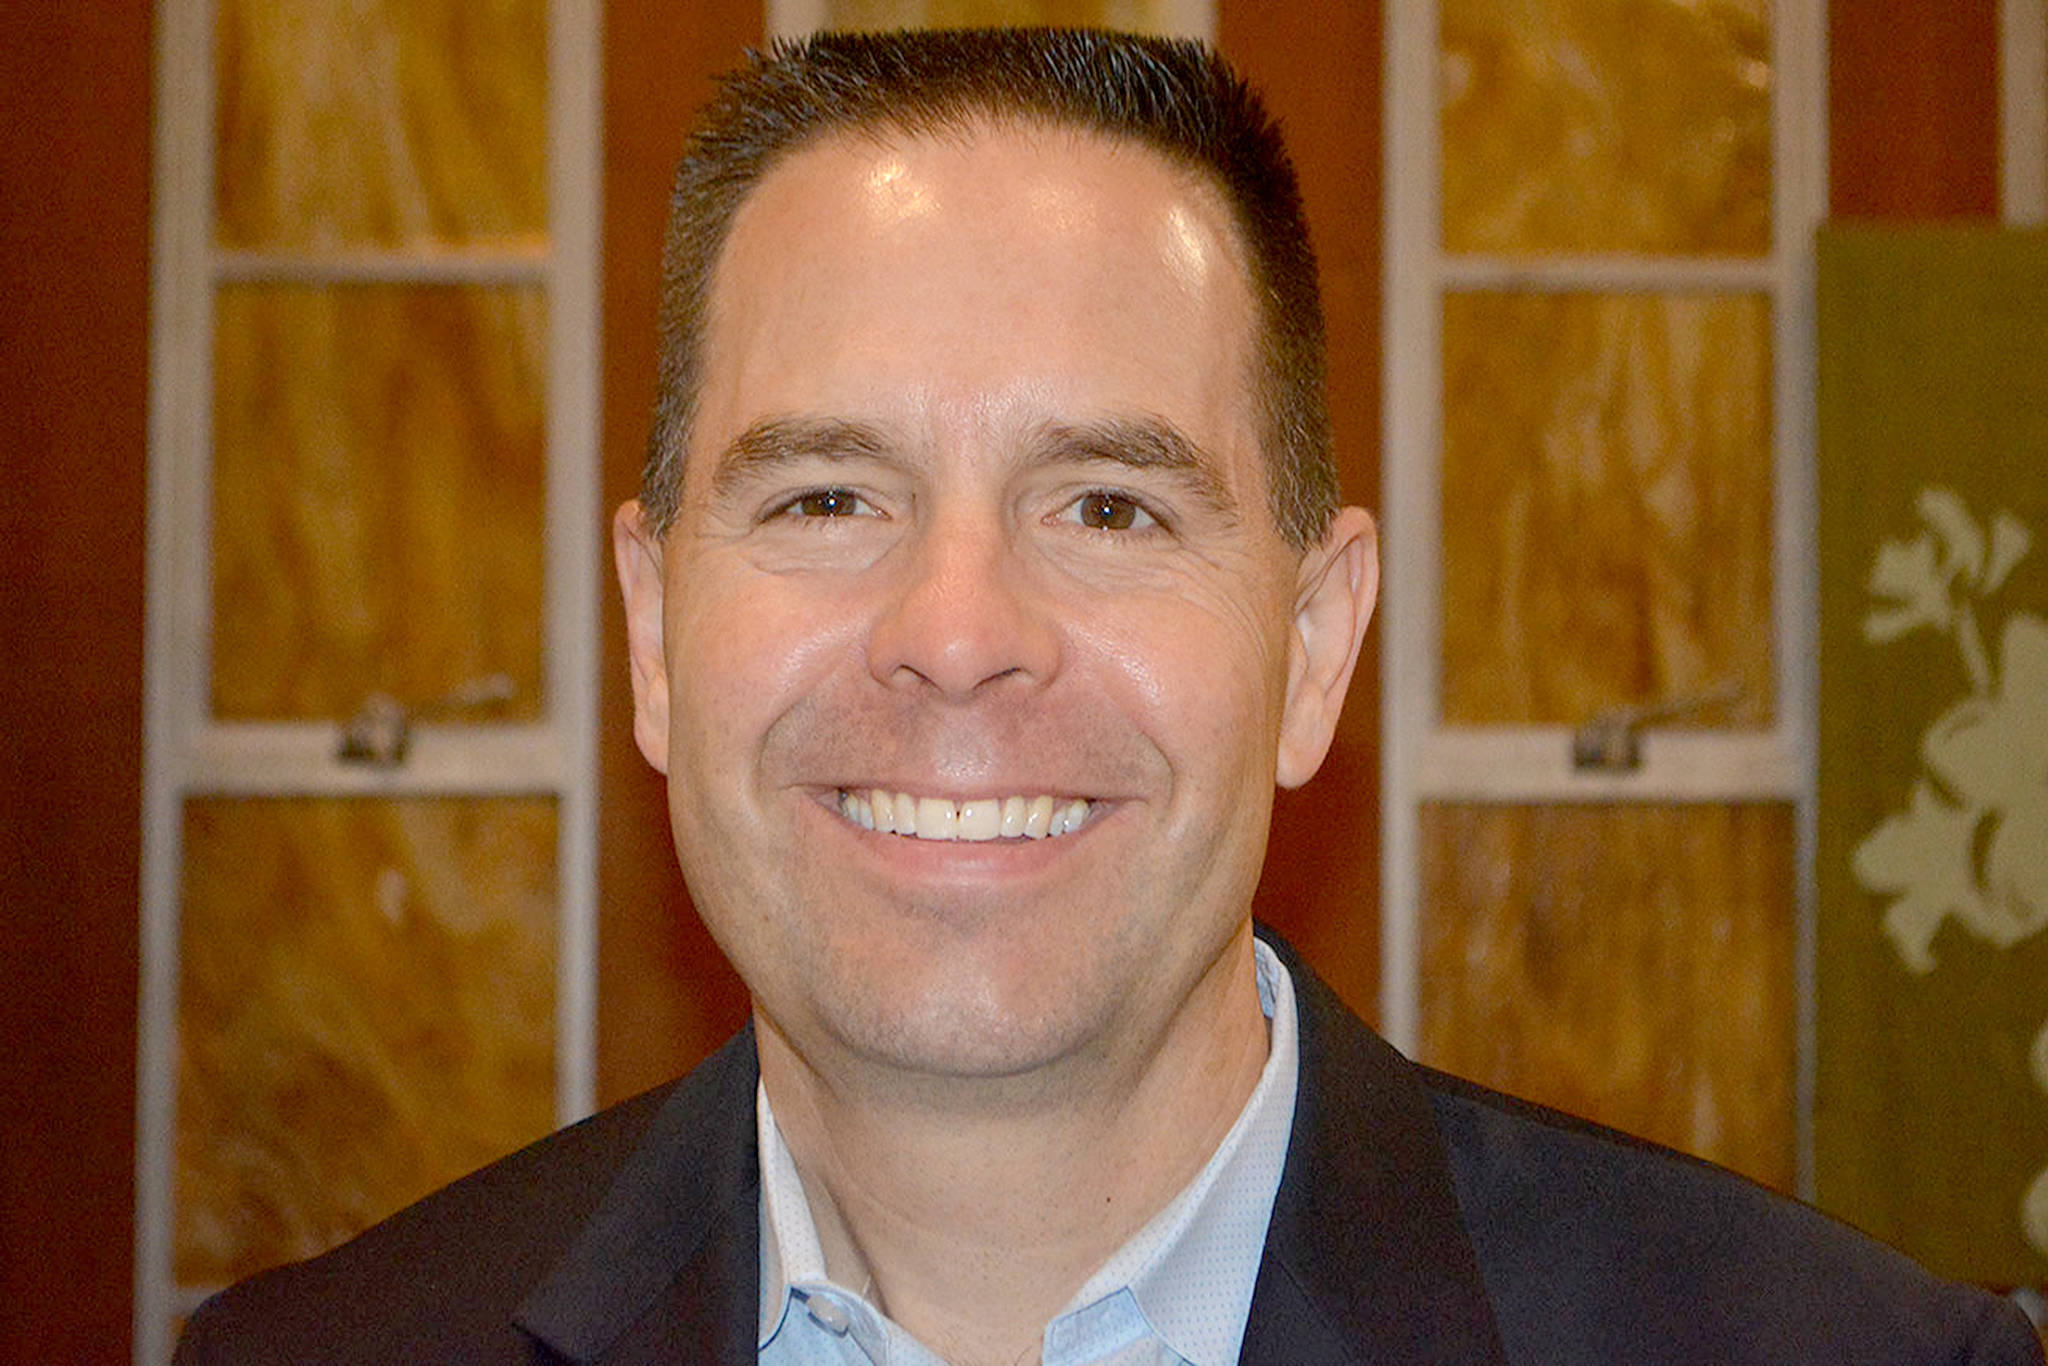 Mayor Nehring reflects on the year that was 2018